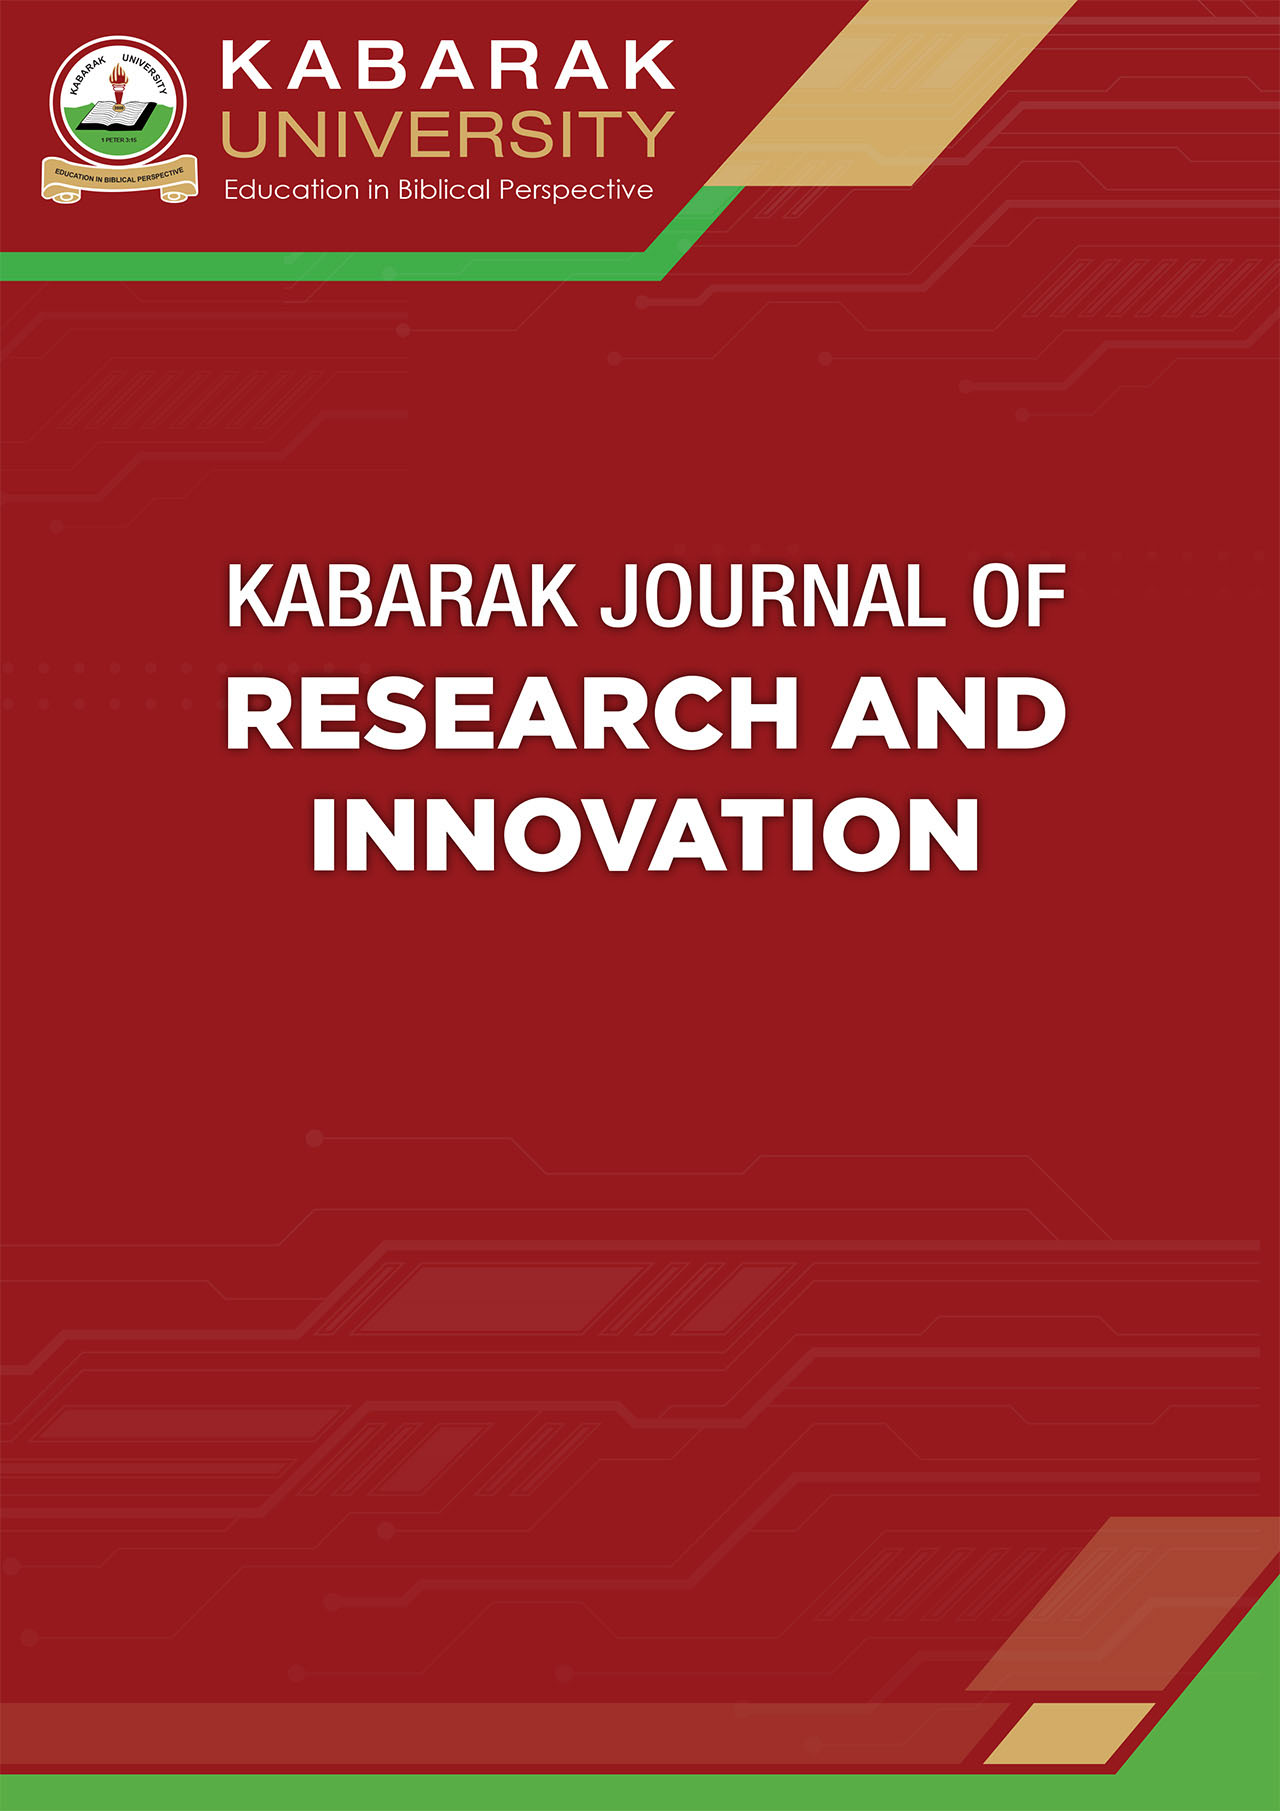 					View Vol. 4 No. 2 (2016): Kabarak Journal of Research and Innovation (KJRI)
				